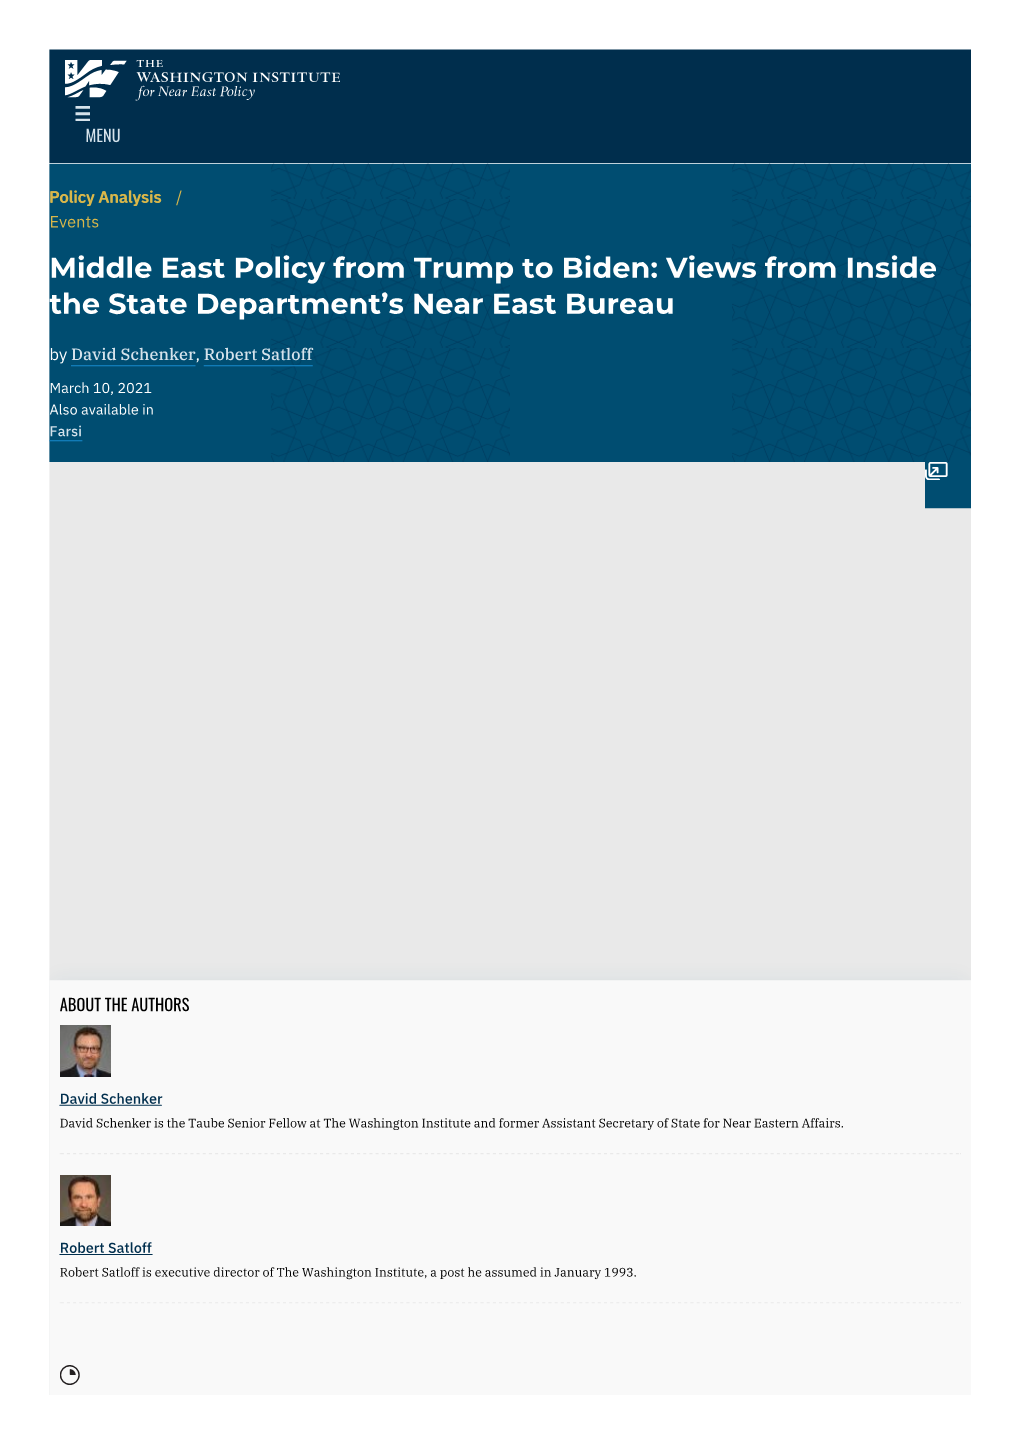 Middle East Policy from Trump to Biden: Views from Inside the State Department’S Near East Bureau by David Schenker, Robert Satloff